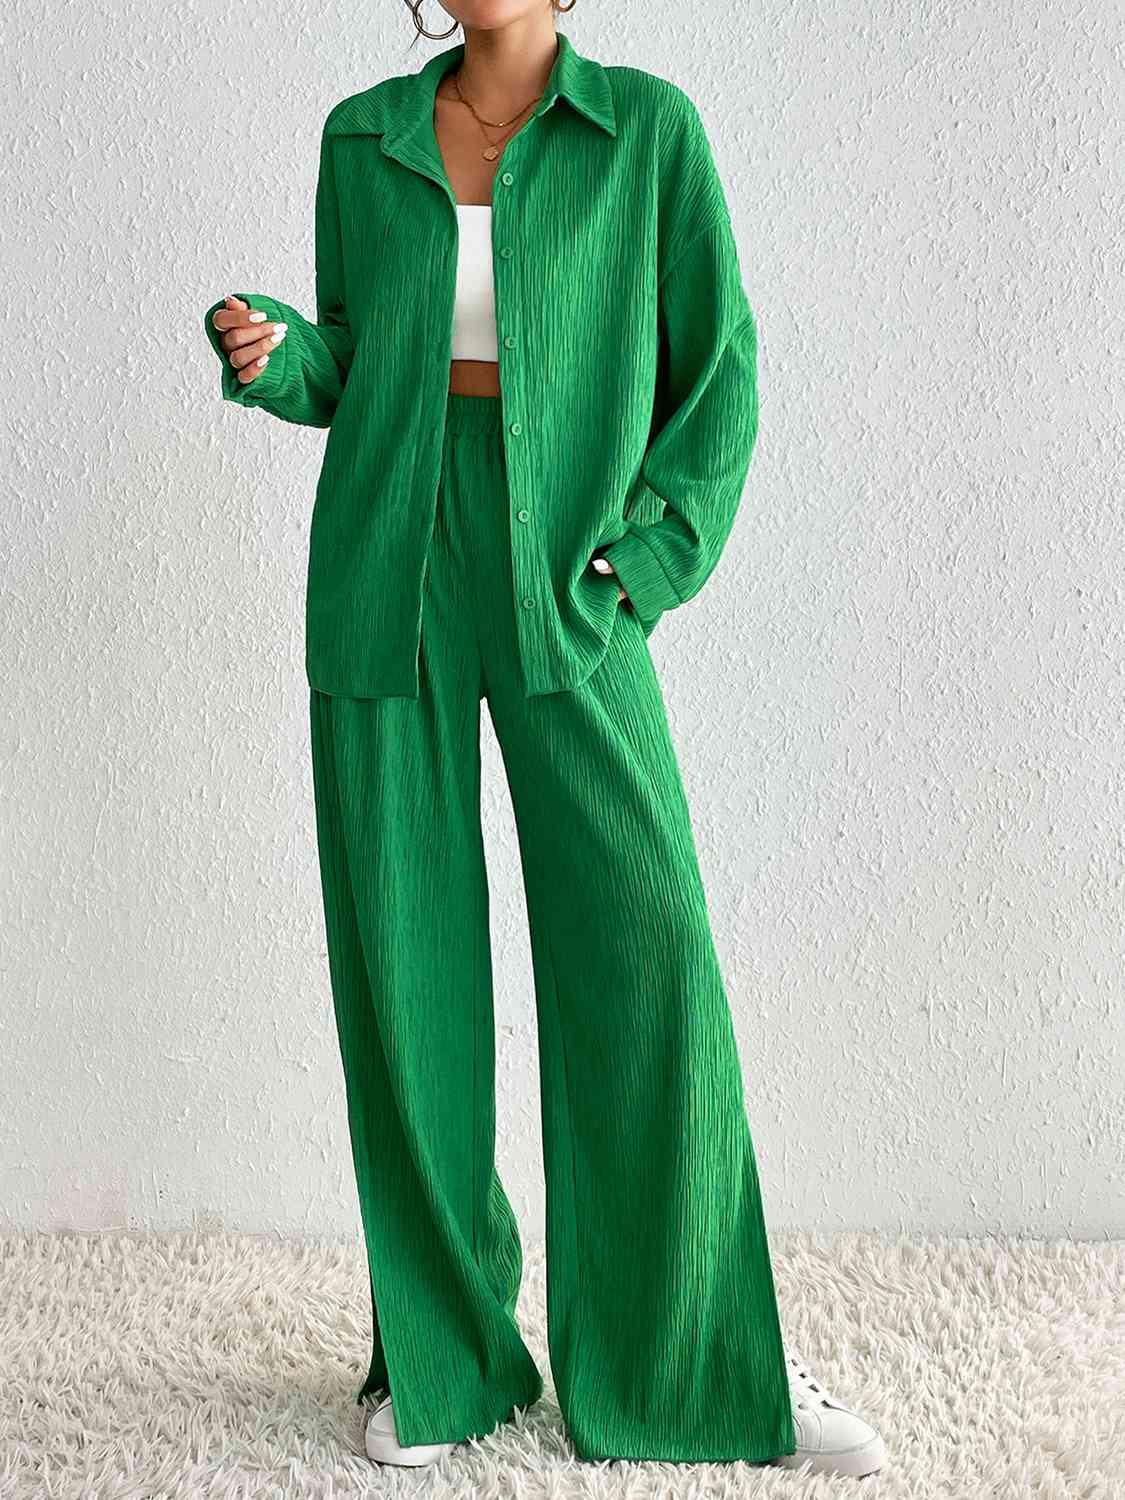 a woman in a green jacket and wide legged pants